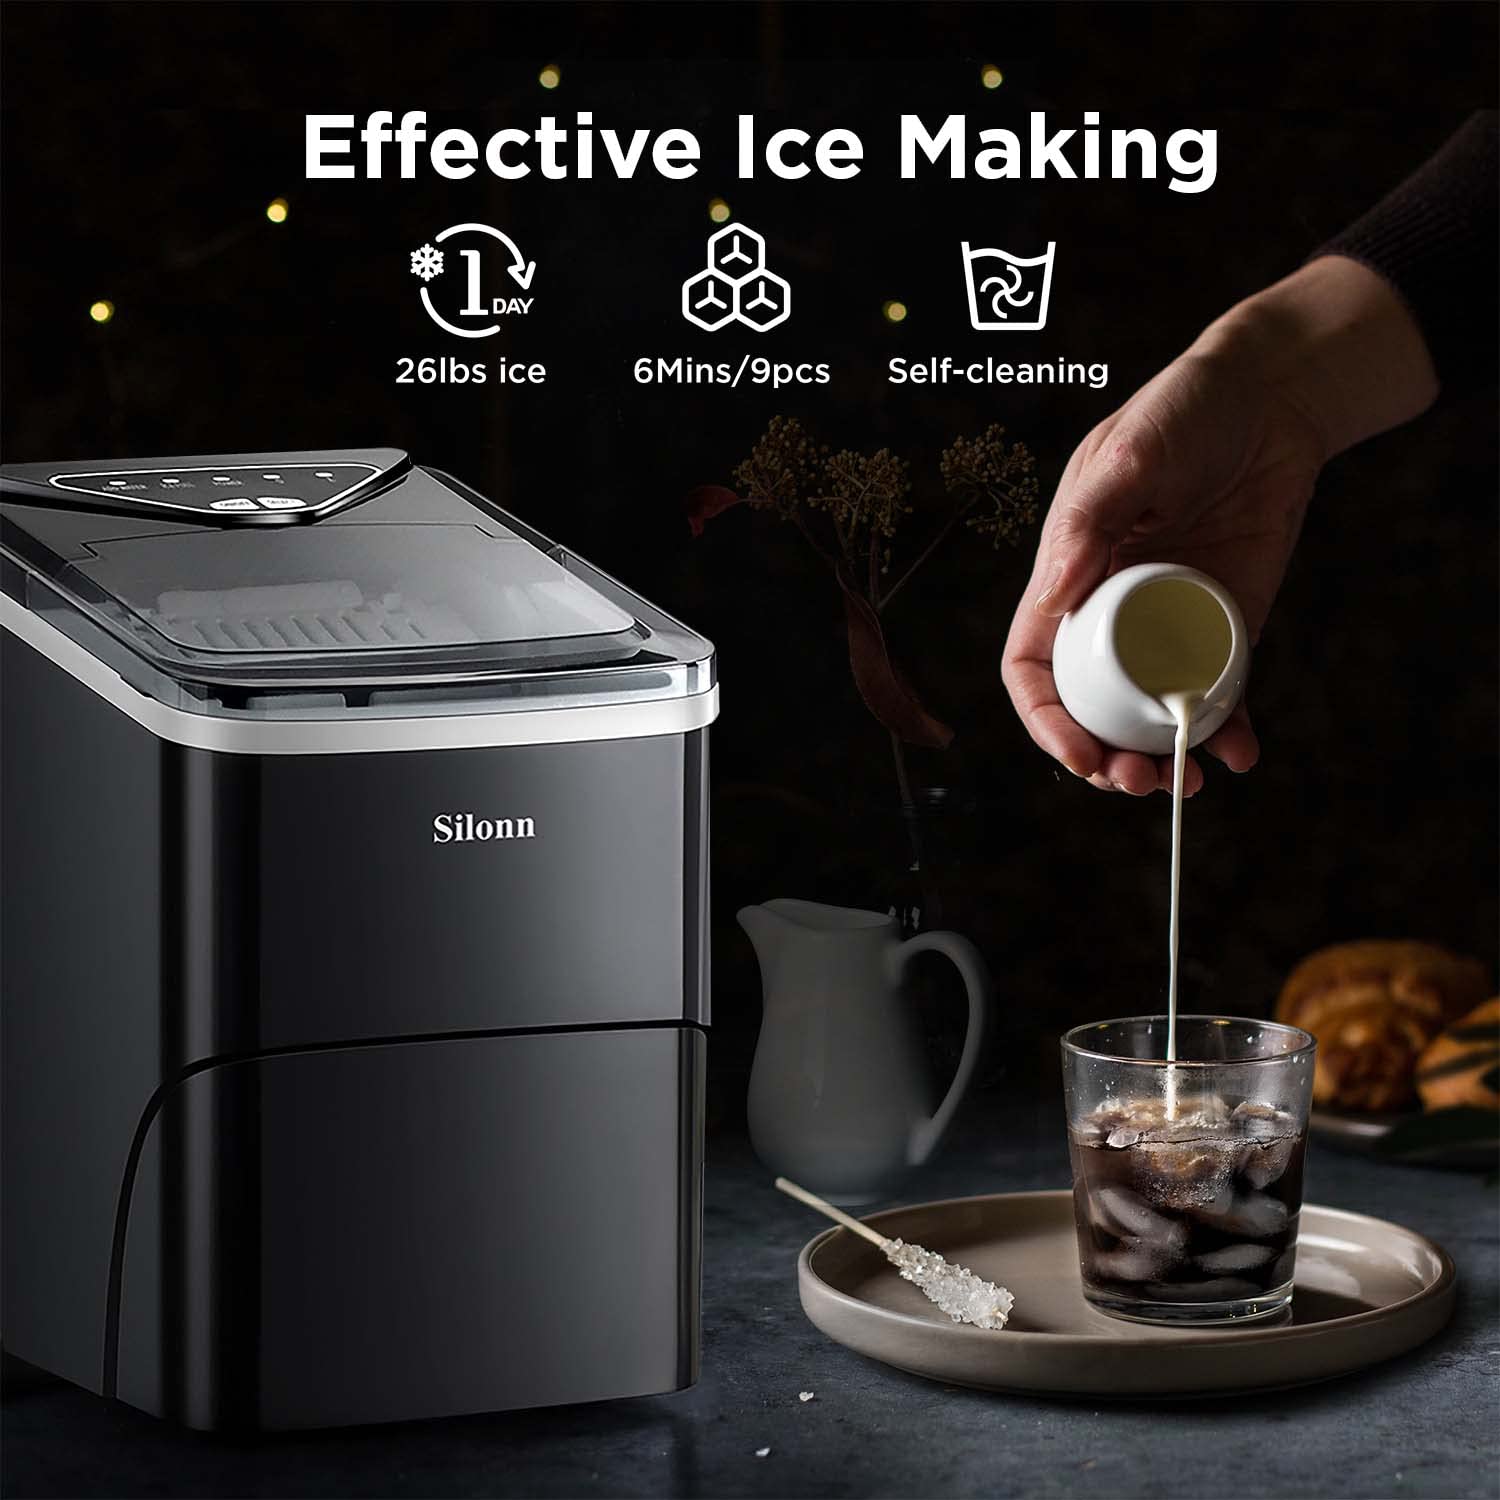 COMFEE 3.3 Cubic Feet Solo Series Retro Refrigerator Sleek Appearance HIPS Interior [Black] & Silonn Ice Makers Countertop, 9 Cubes Ready in 6 Mins, 26lbs in 24Hrs, Self-Cleaning Ice Machine